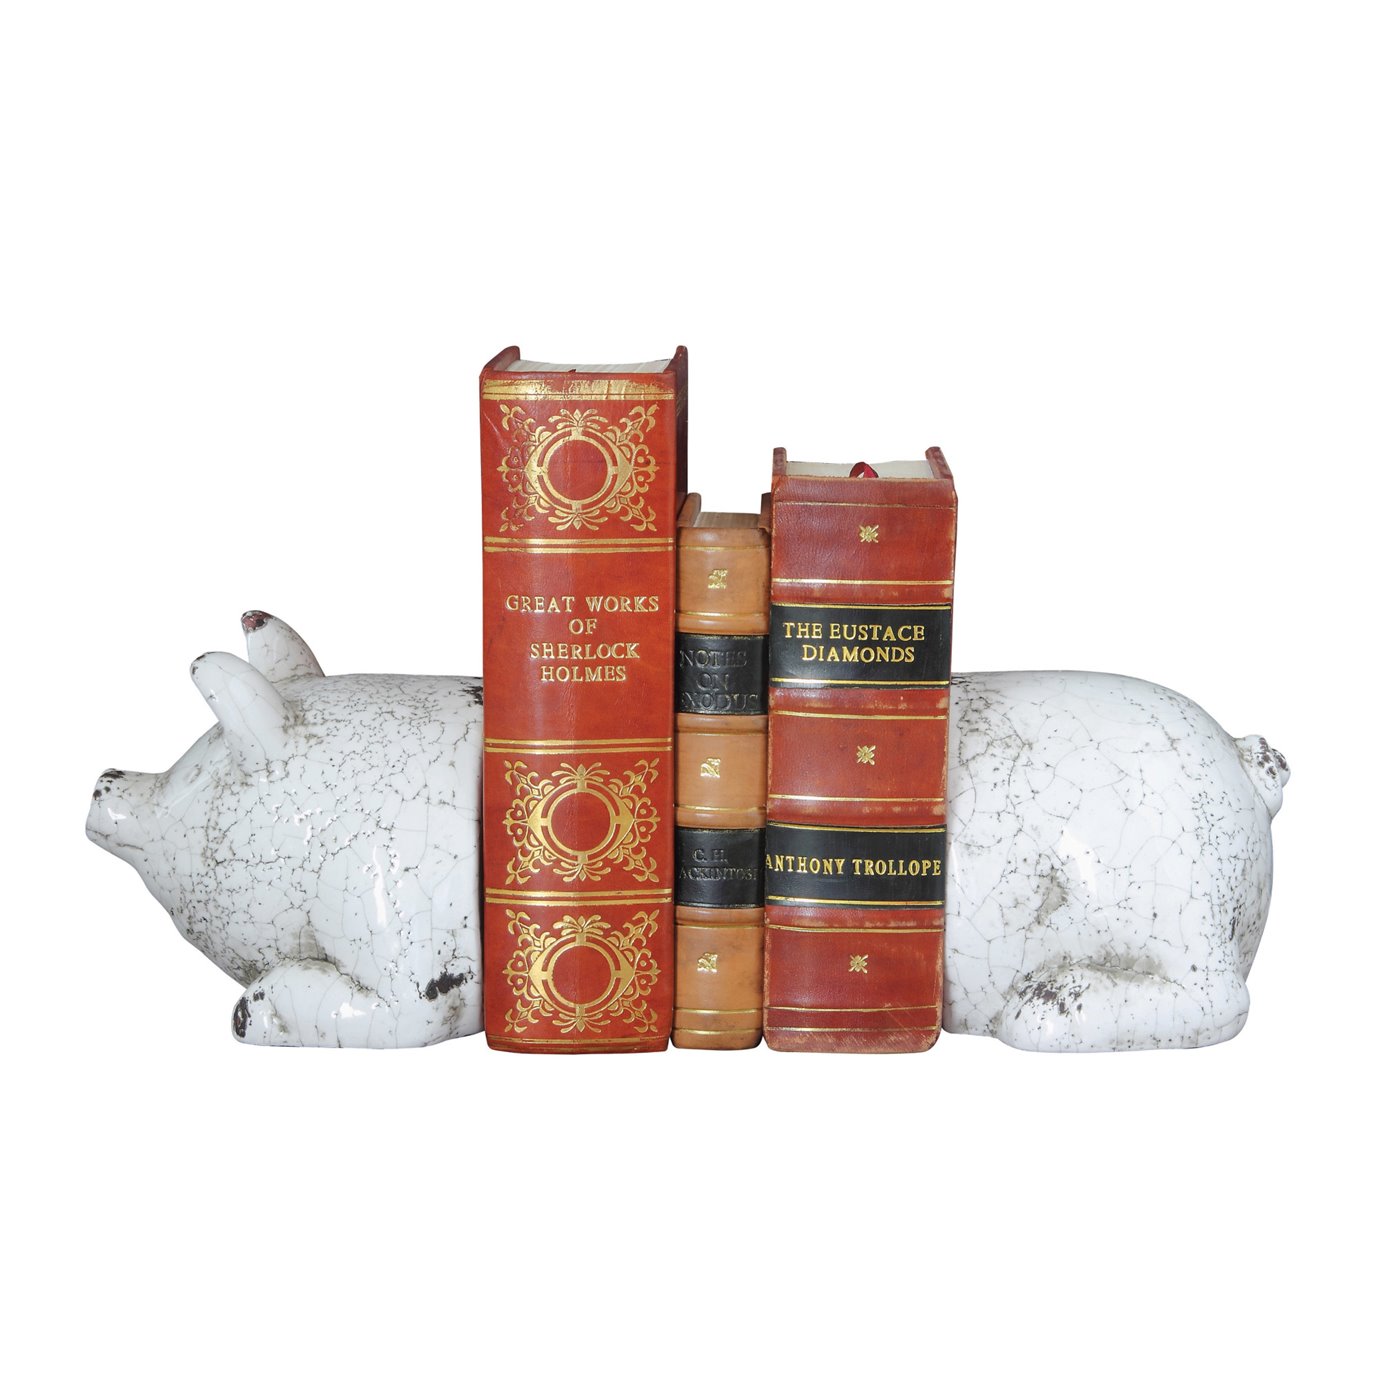 Distressed White Pig Shaped Terracotta Bookends (Set of 2 Pieces)